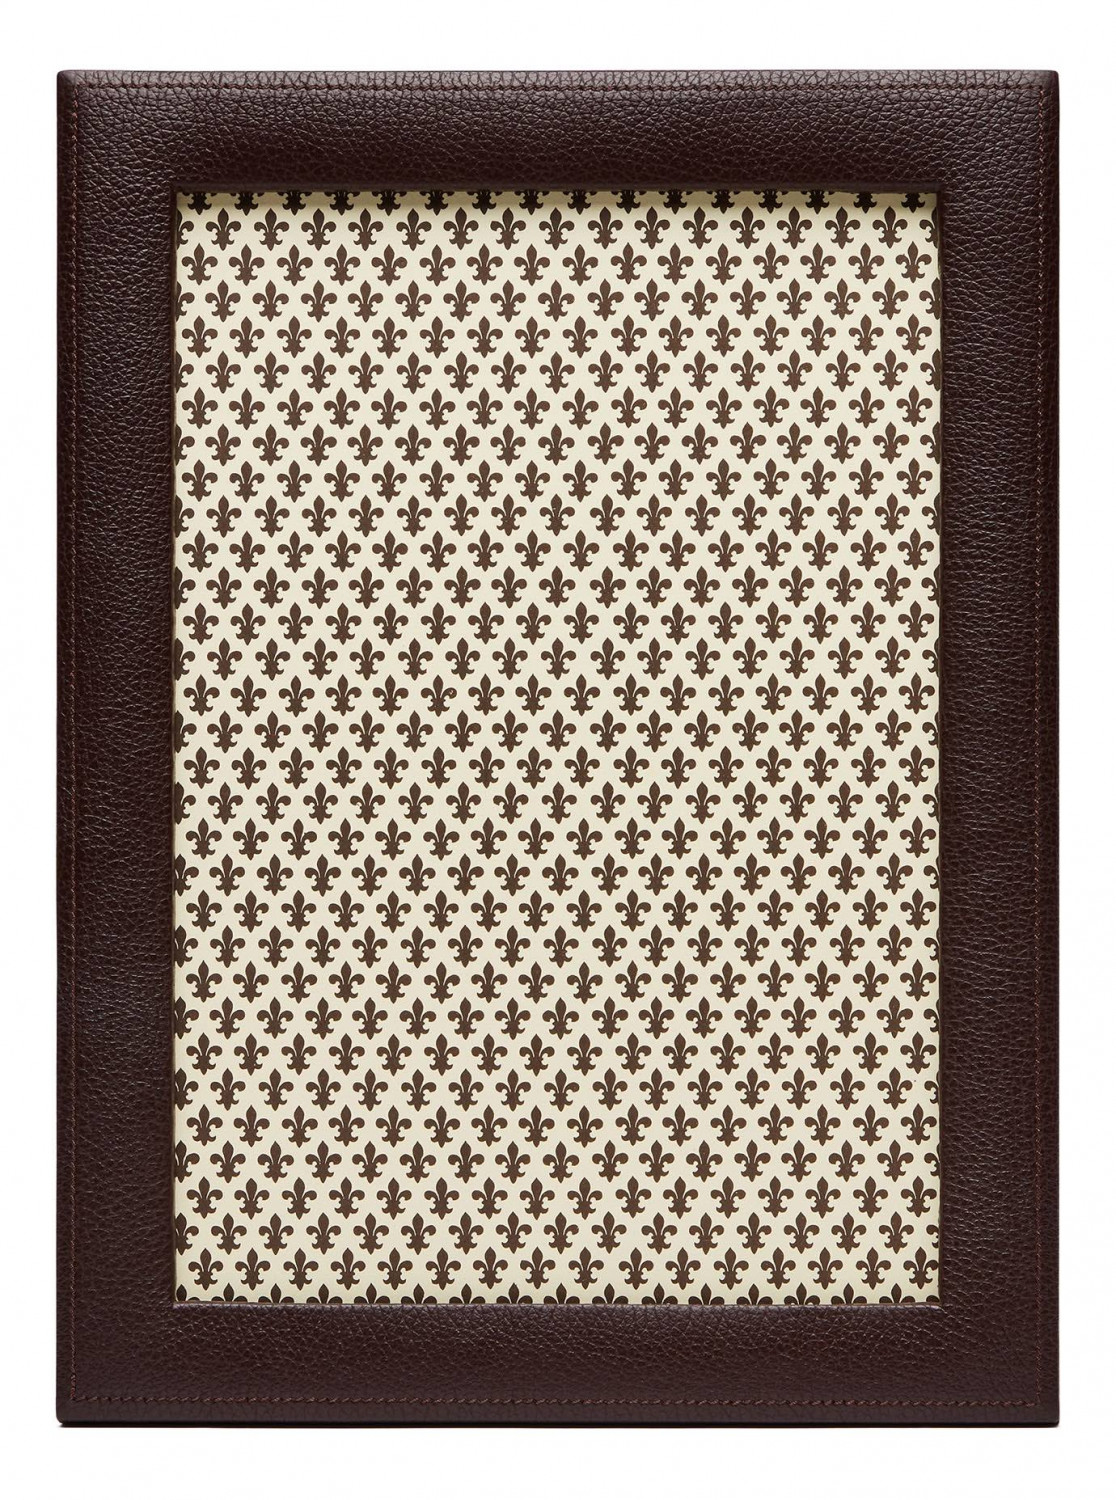 Frame in tumbled leather